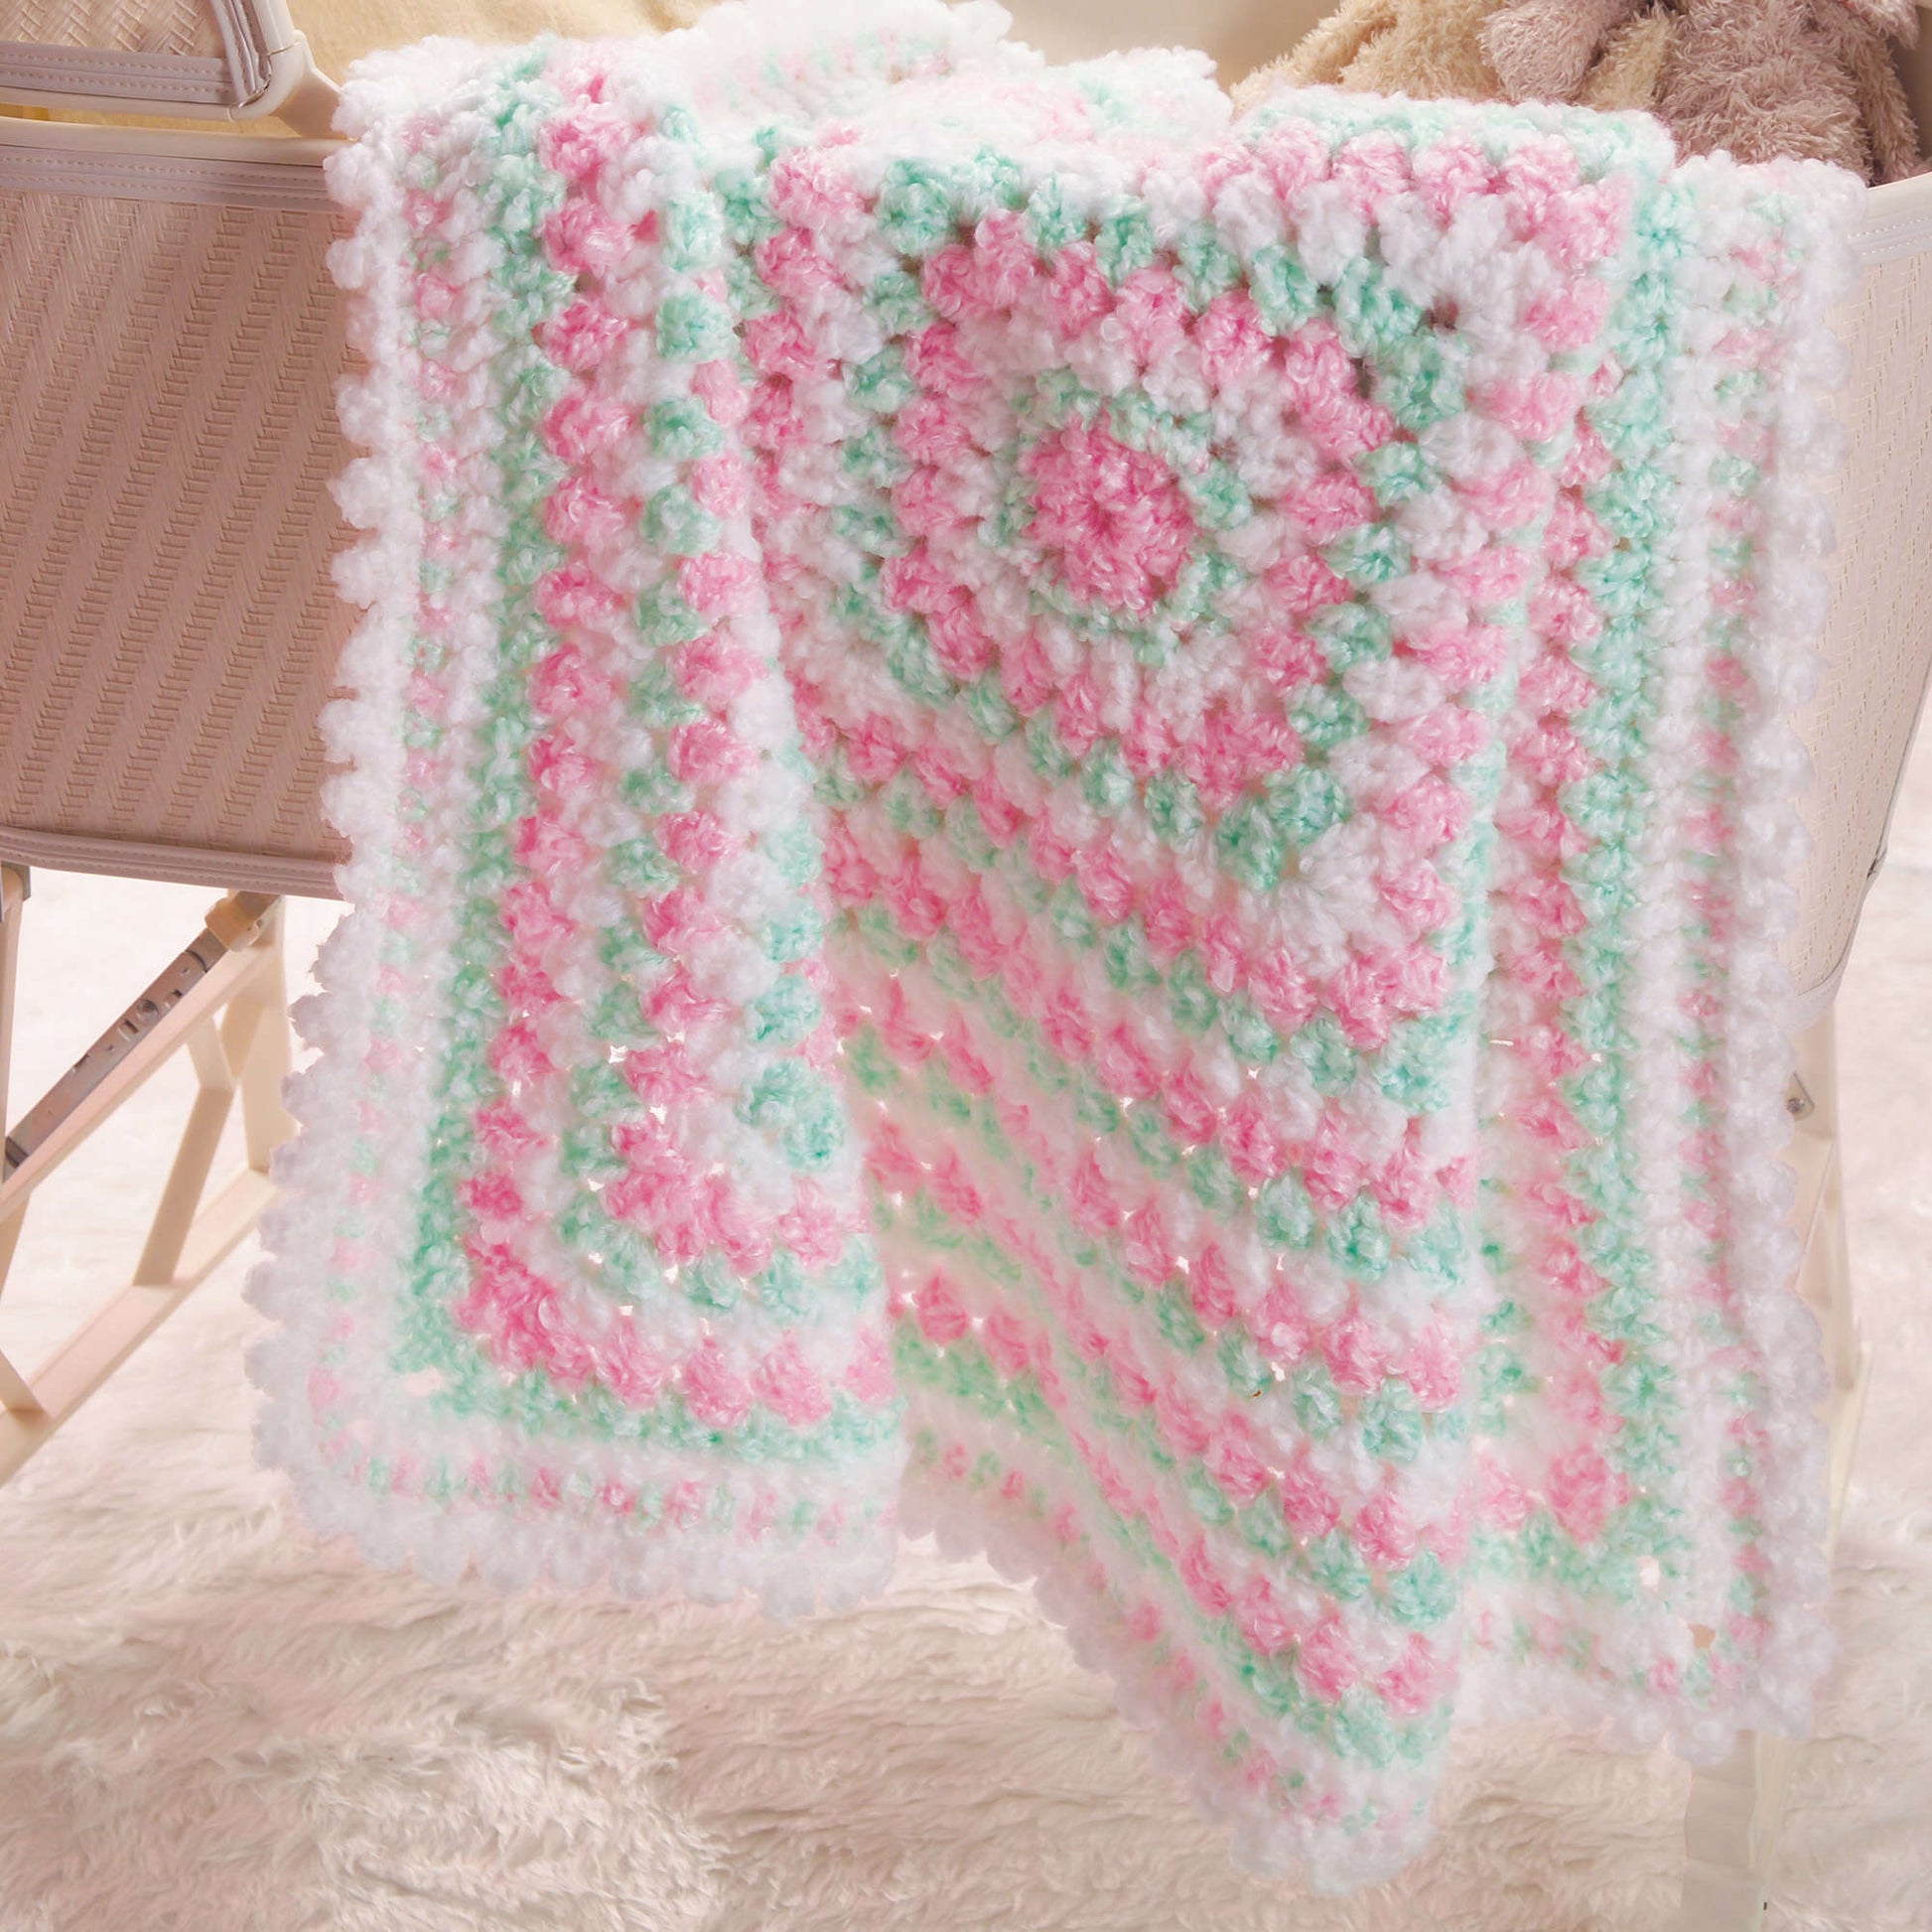 Free Red Heart Crochet Baby's First Blanket Pattern